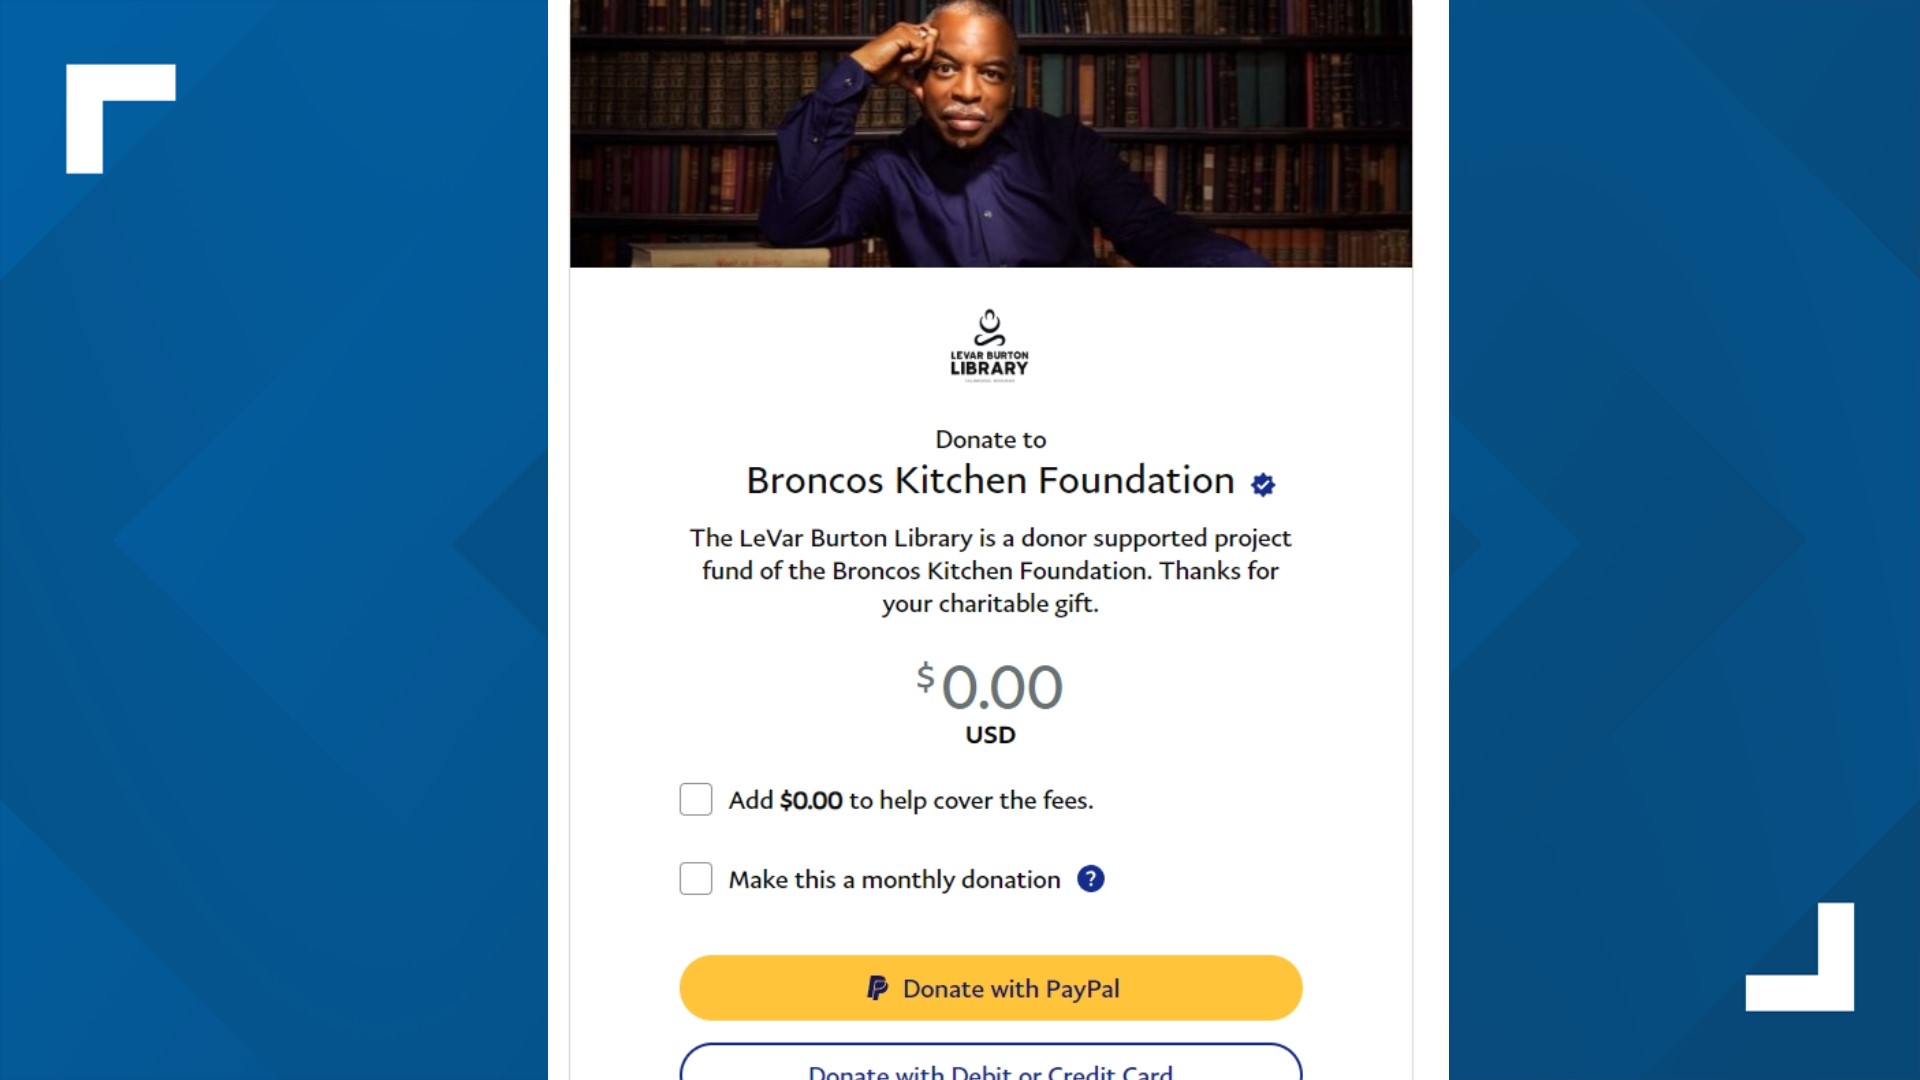 The Broncos Kitchen Foundation has issued an apology after asking for donations to establish the "LeVar Burton Library" without permission from LeVar Burton.